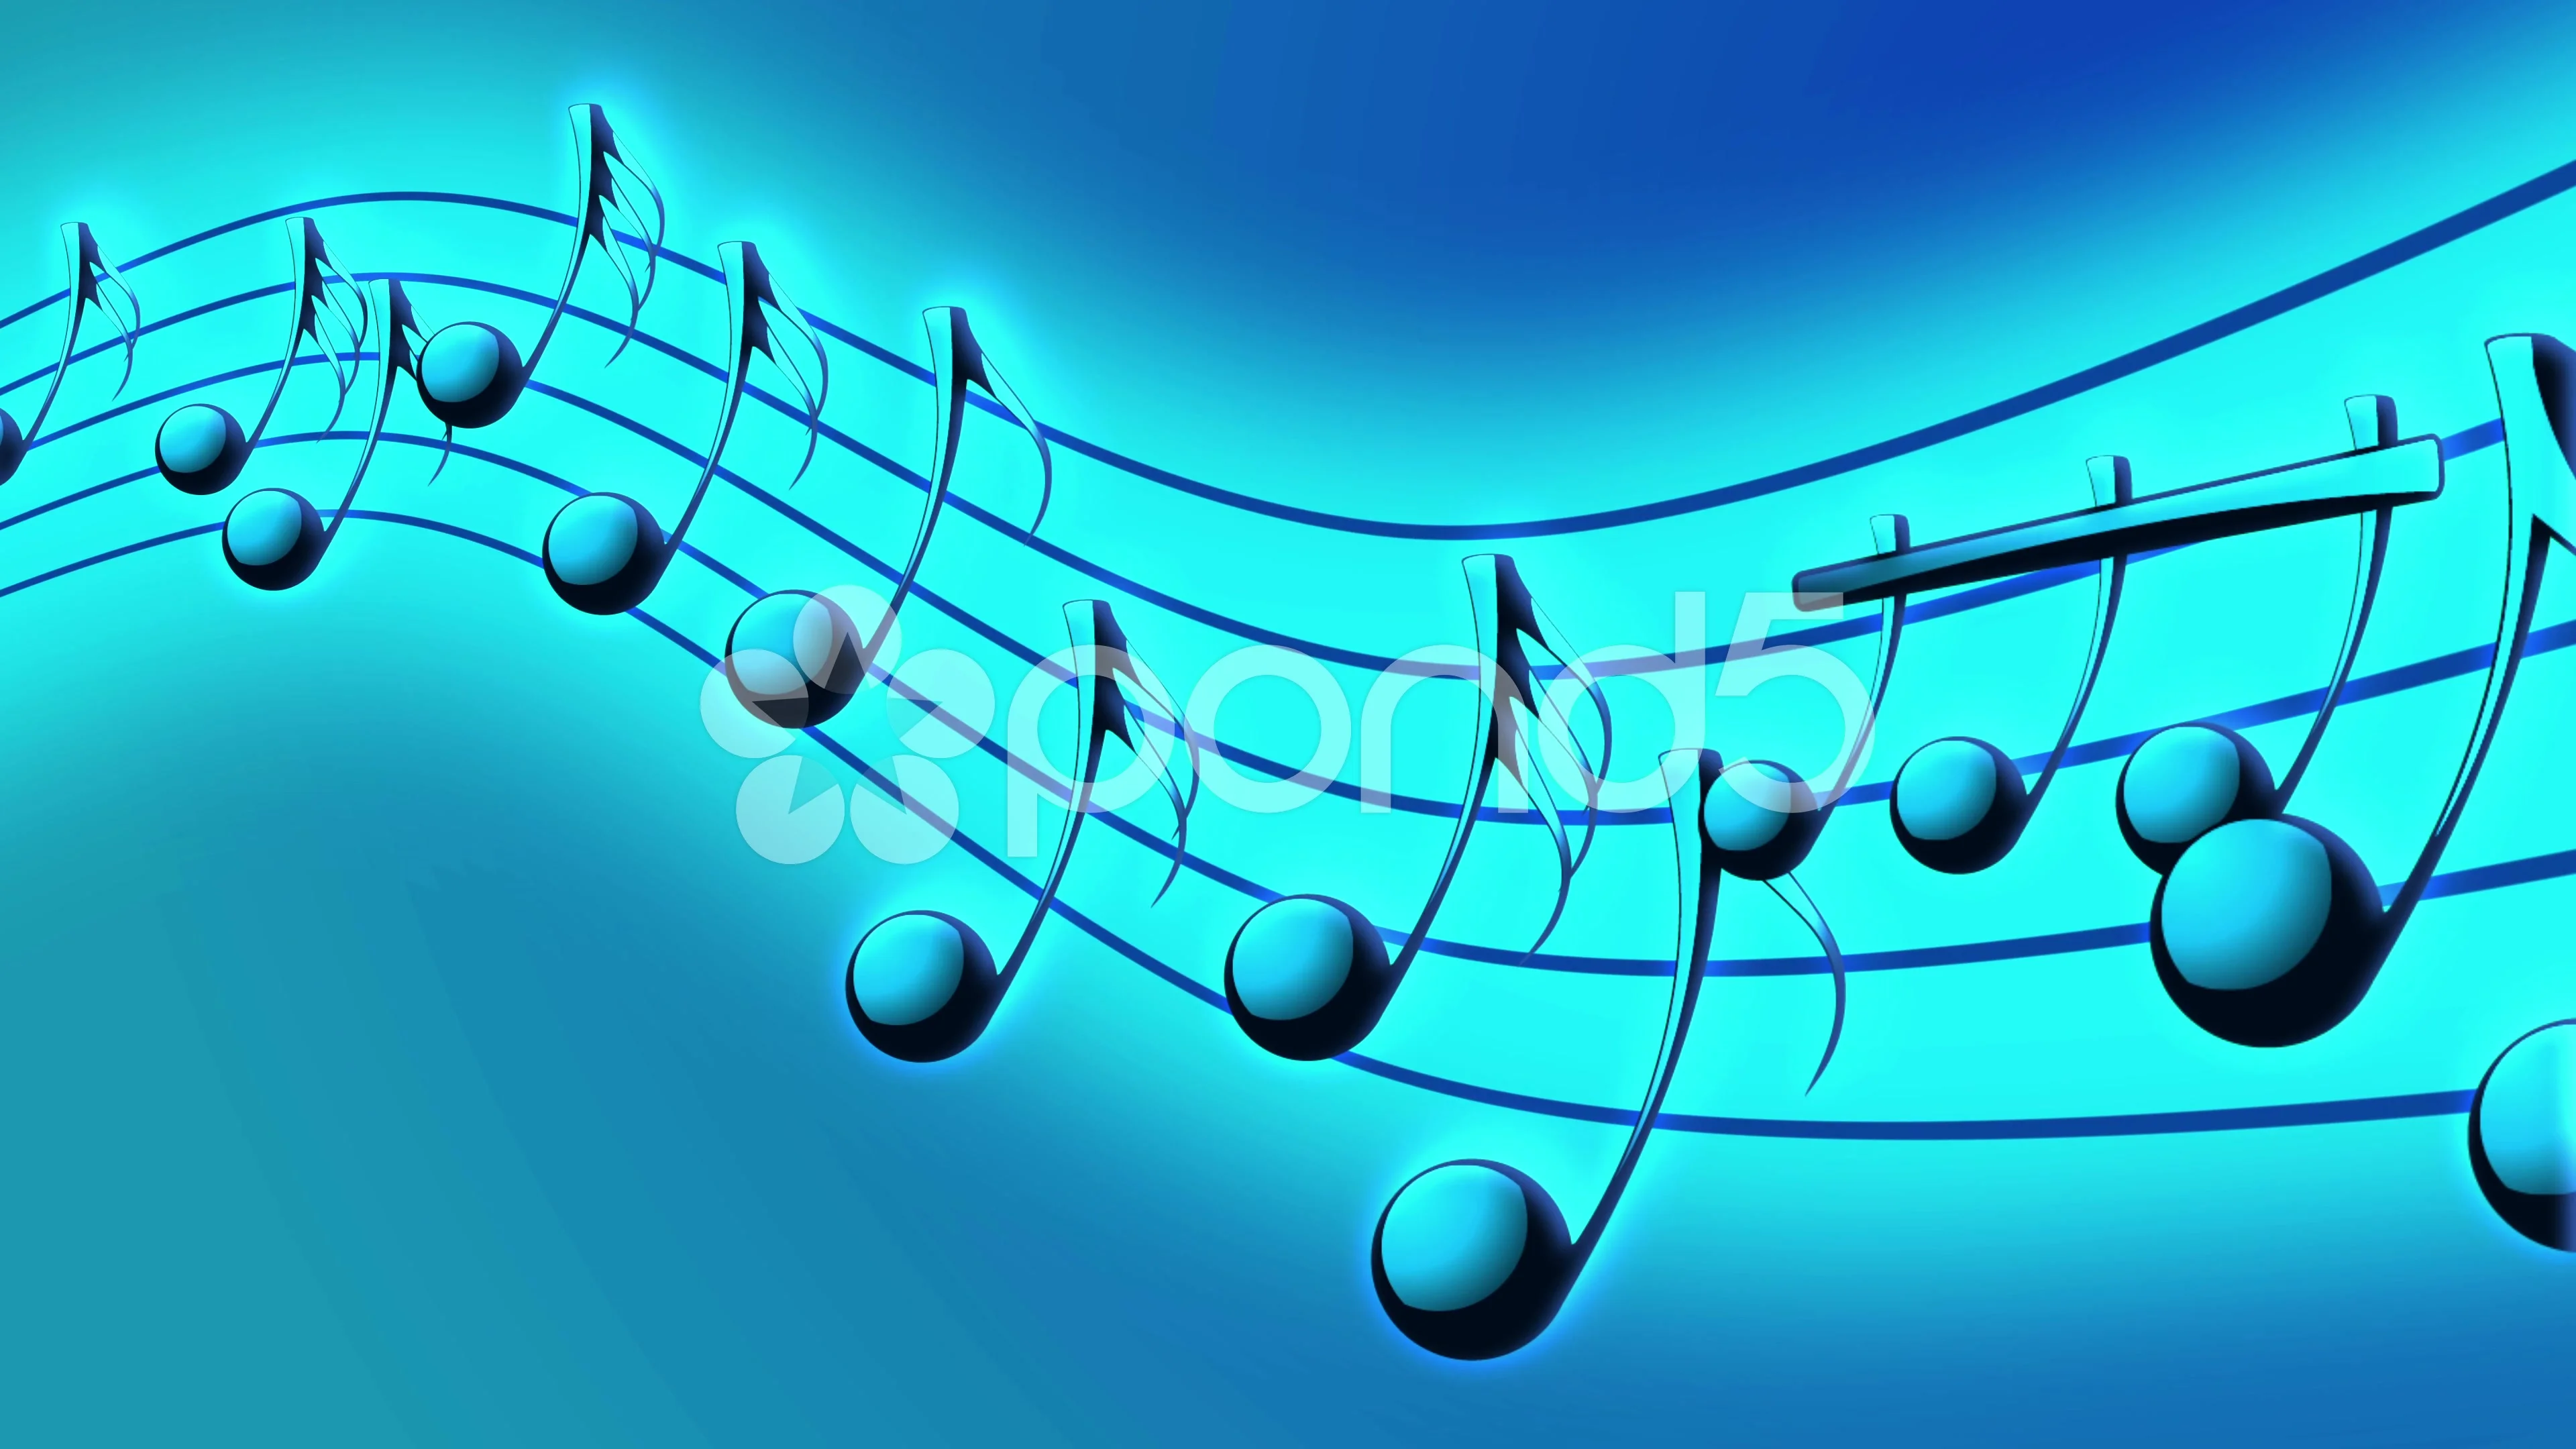 blue music notes background